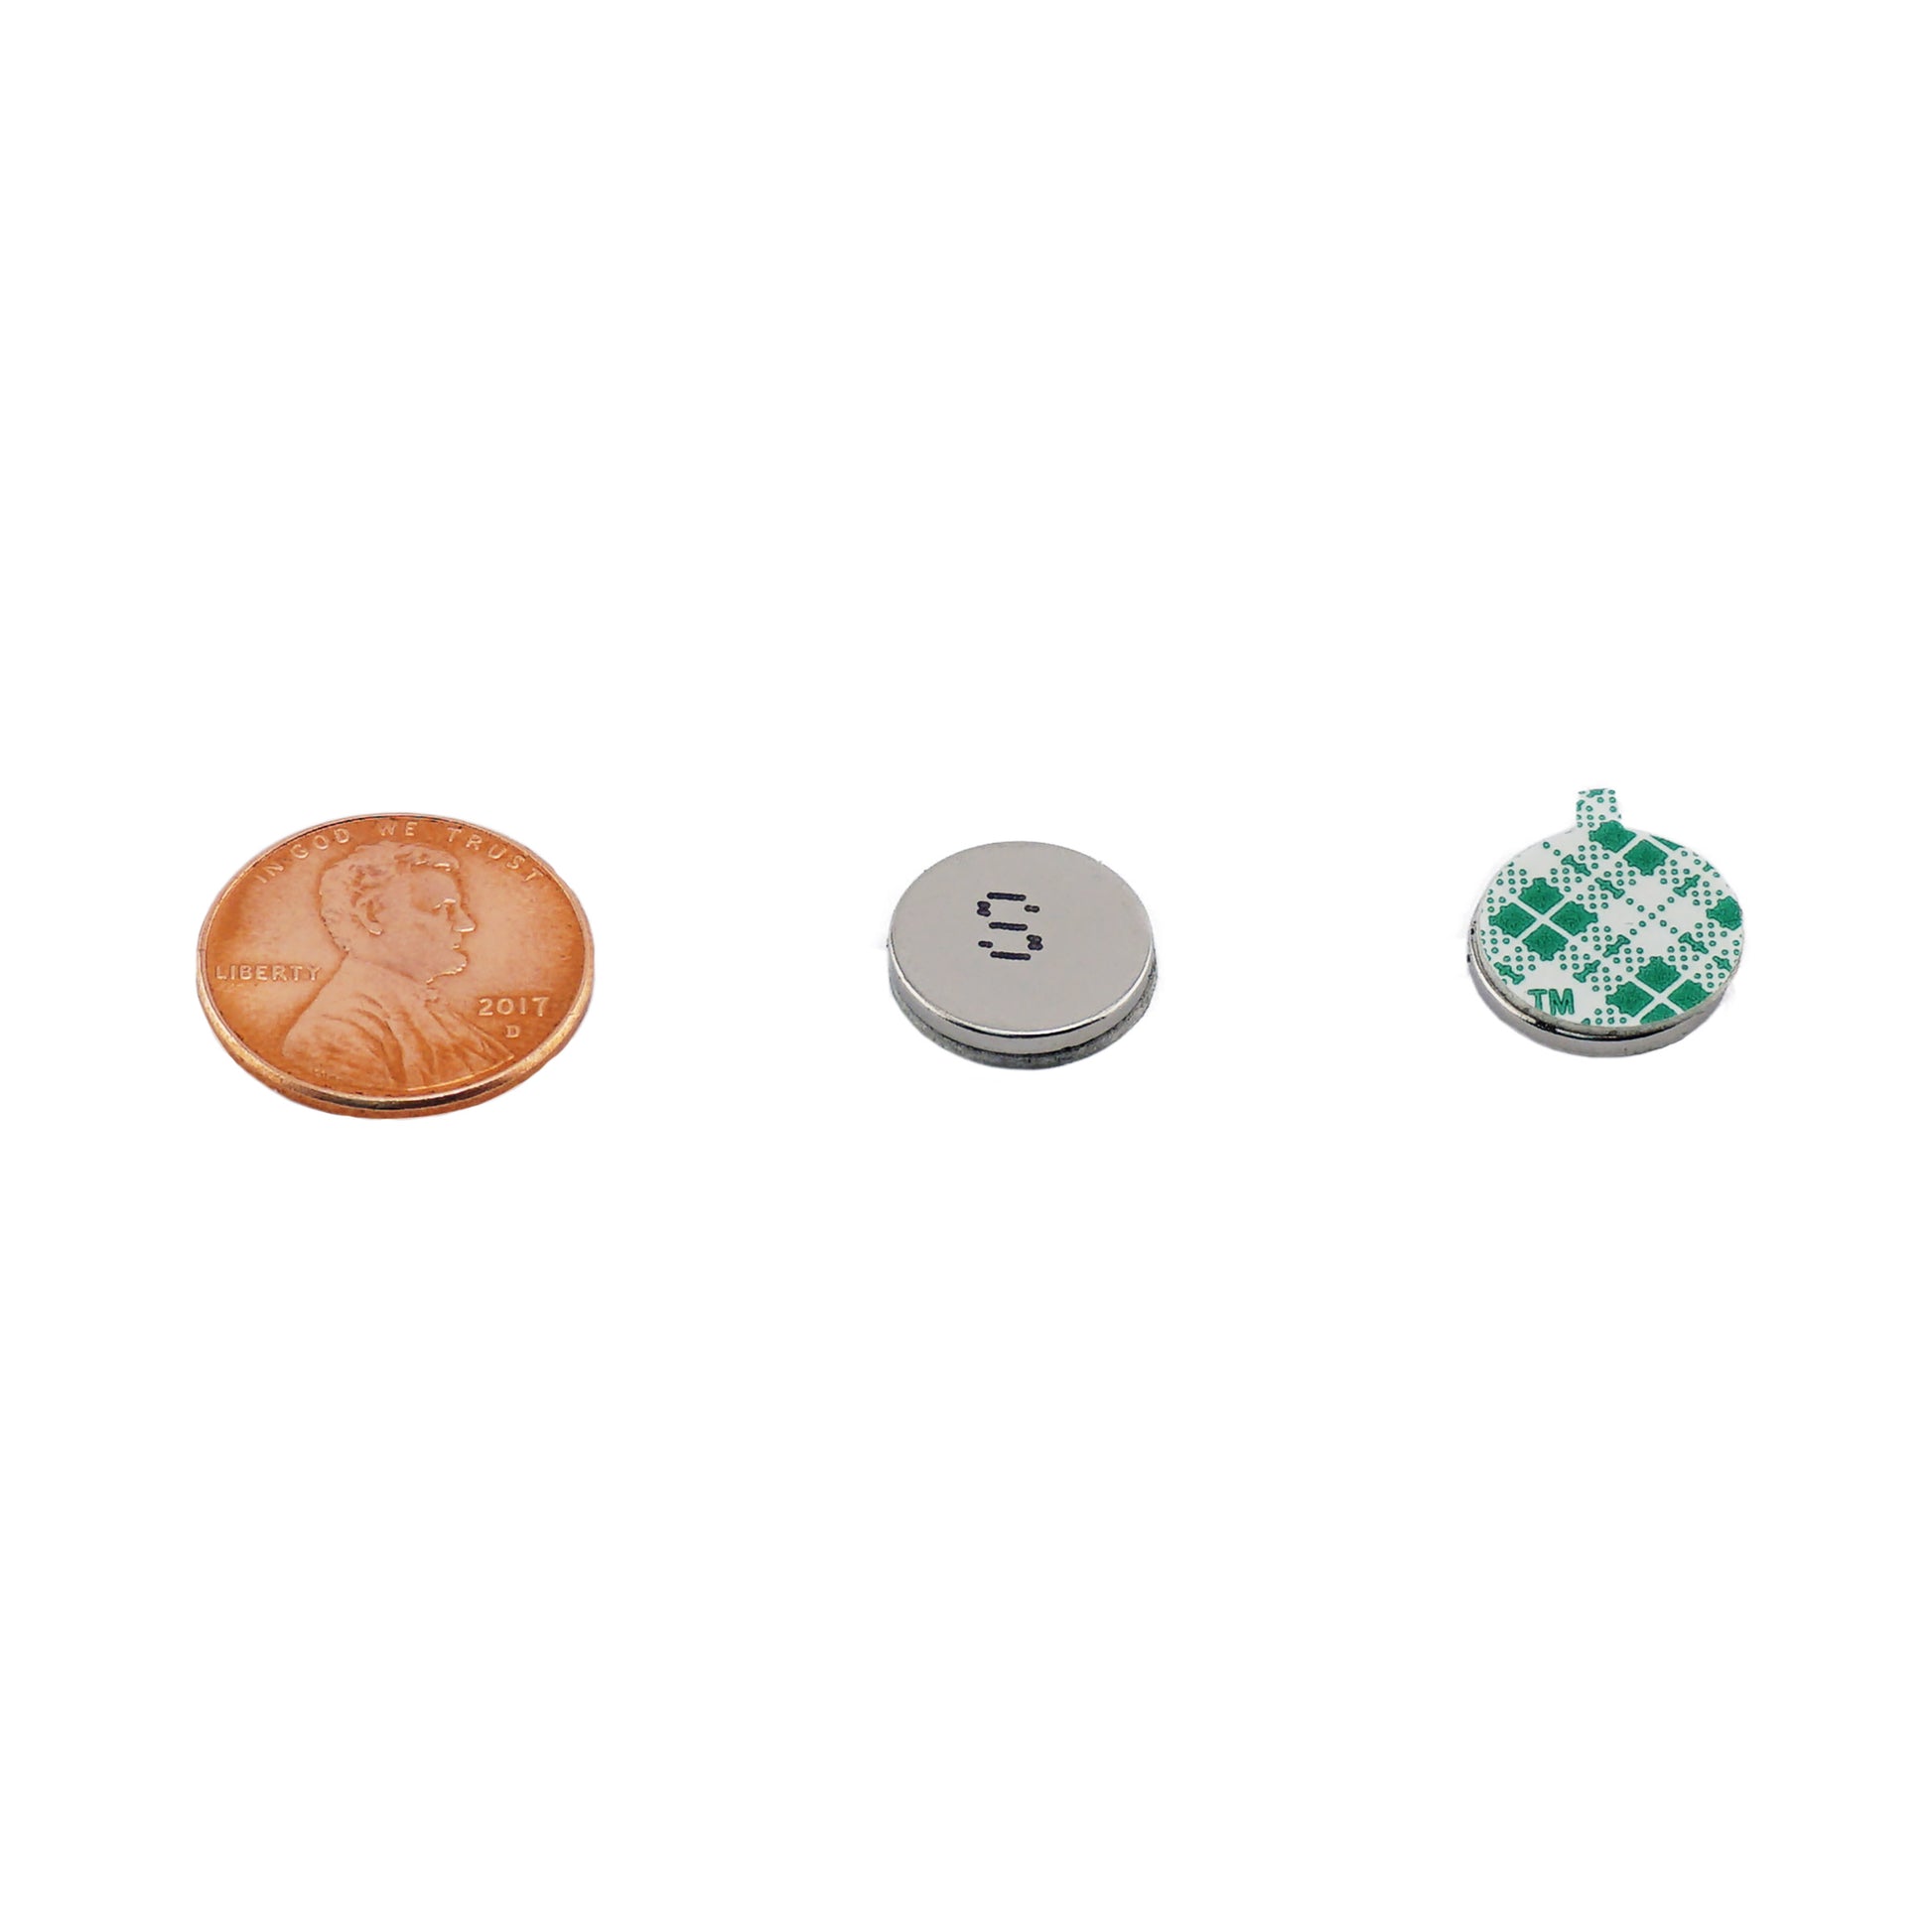 Load image into Gallery viewer, FSND50S Neodymium Disc Magnet with Adhesive - Compared to Penny for Size Reference